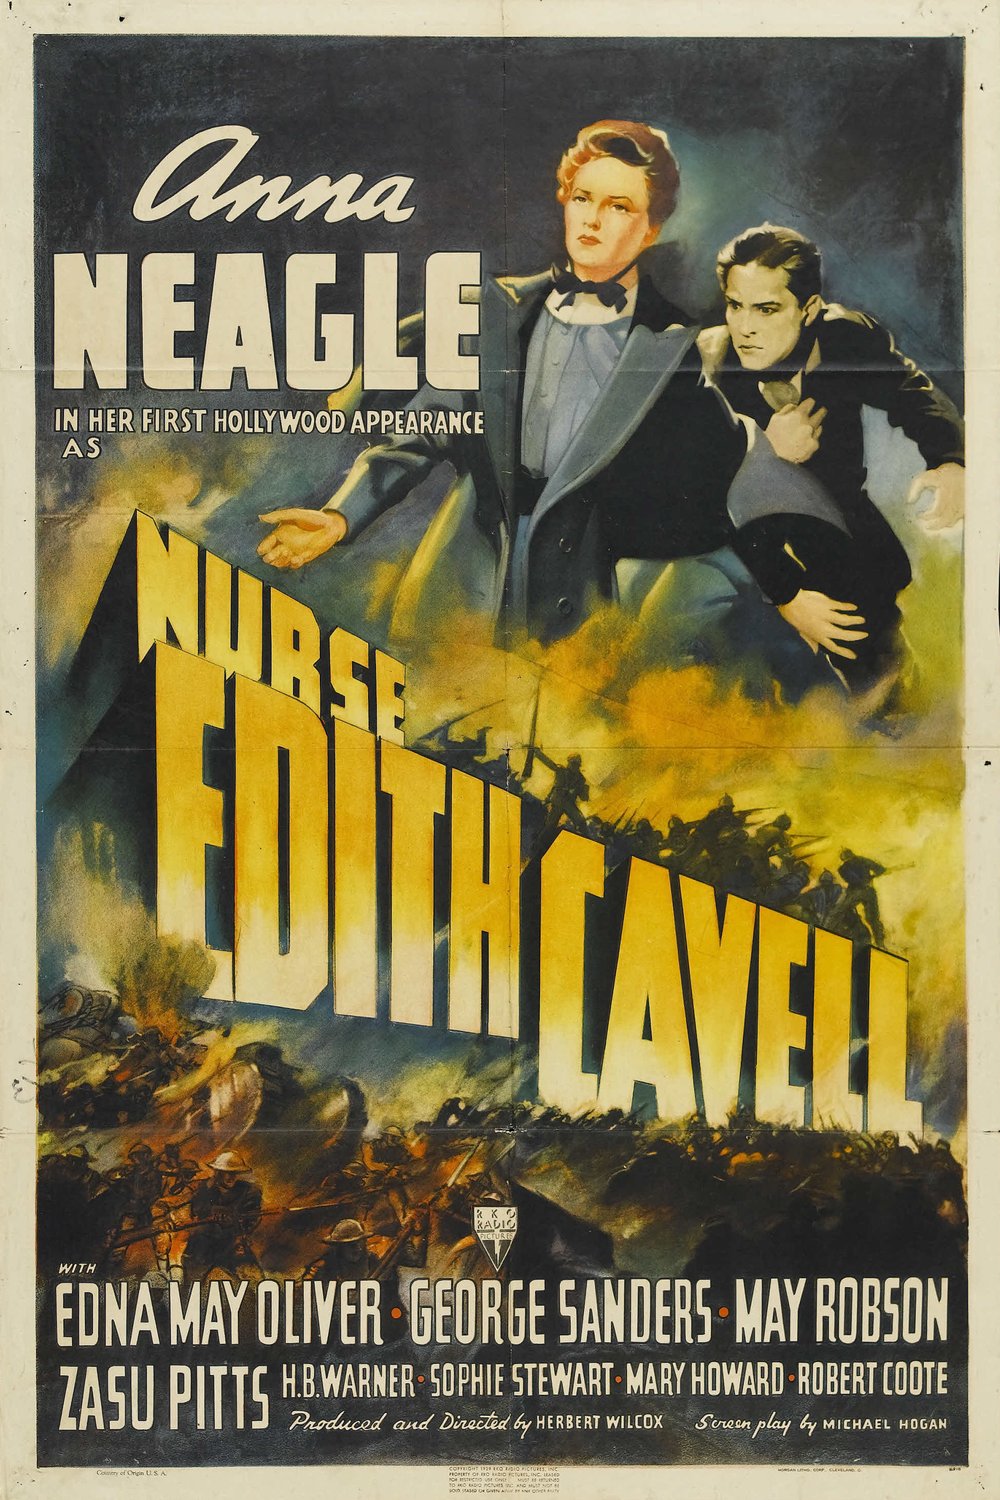 Poster of the movie Nurse Edith Cavell